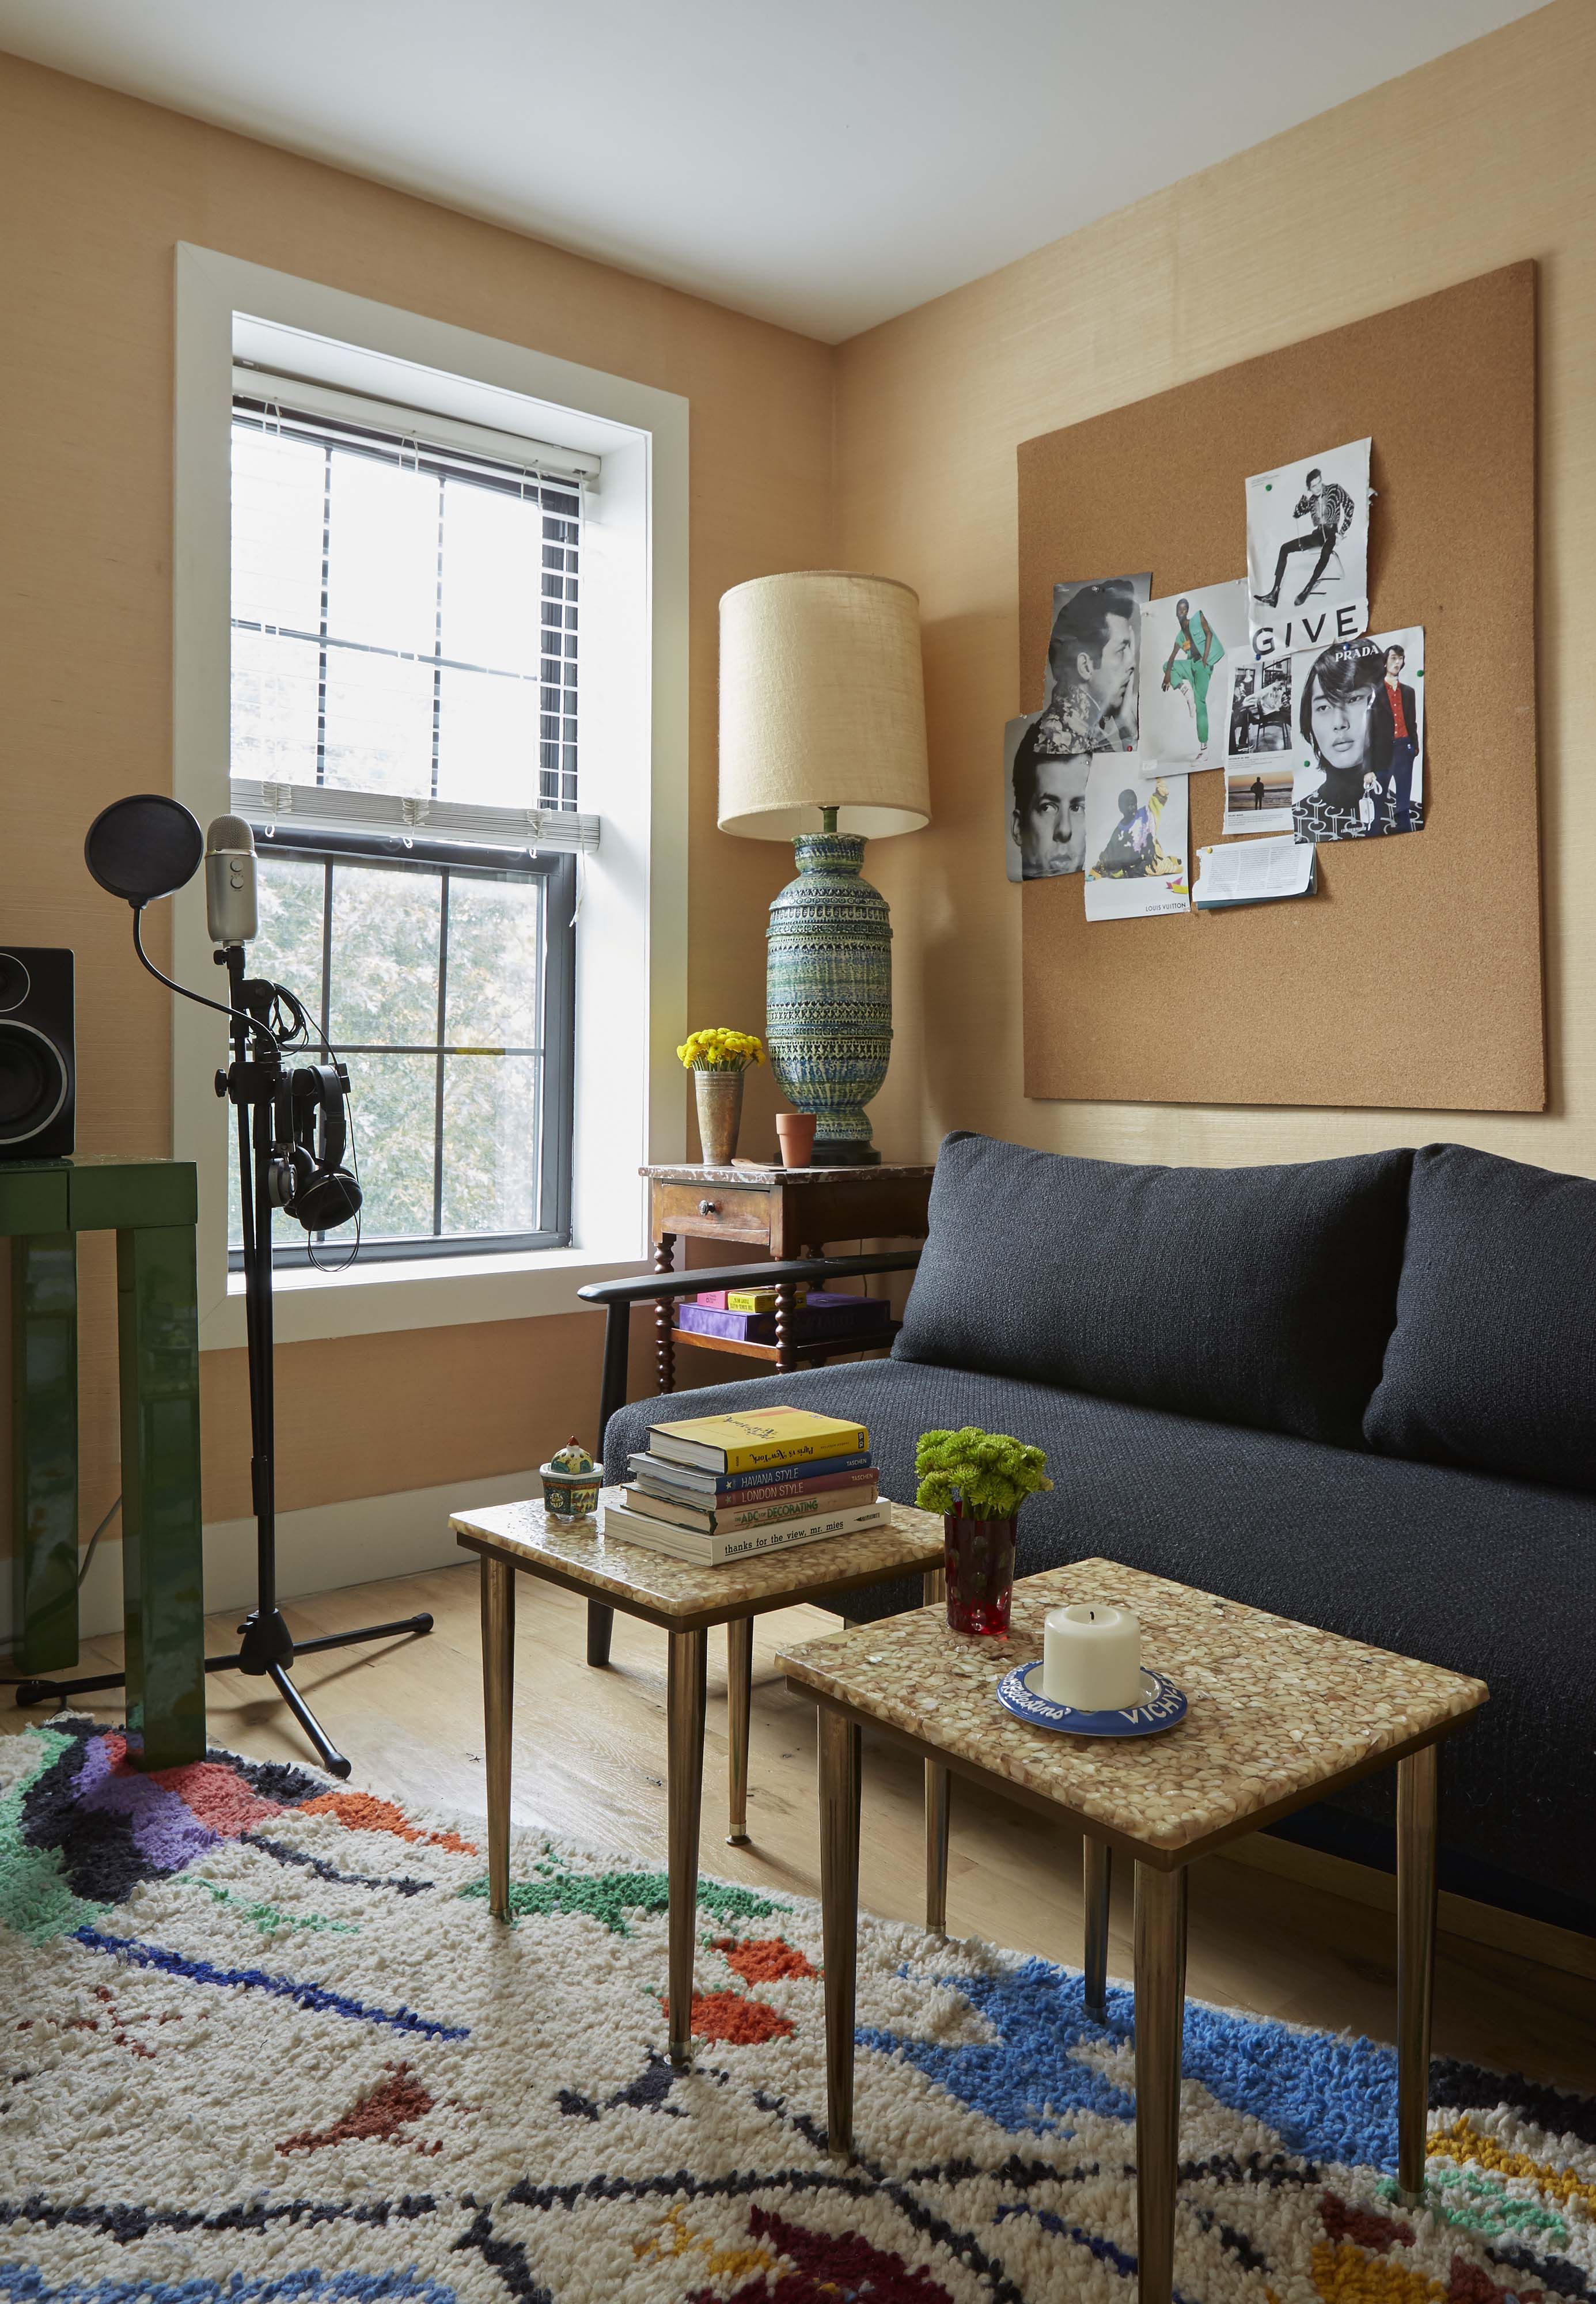 How Chris Bletzer Turned a Rarely-Used Room Into a Useful Home Office